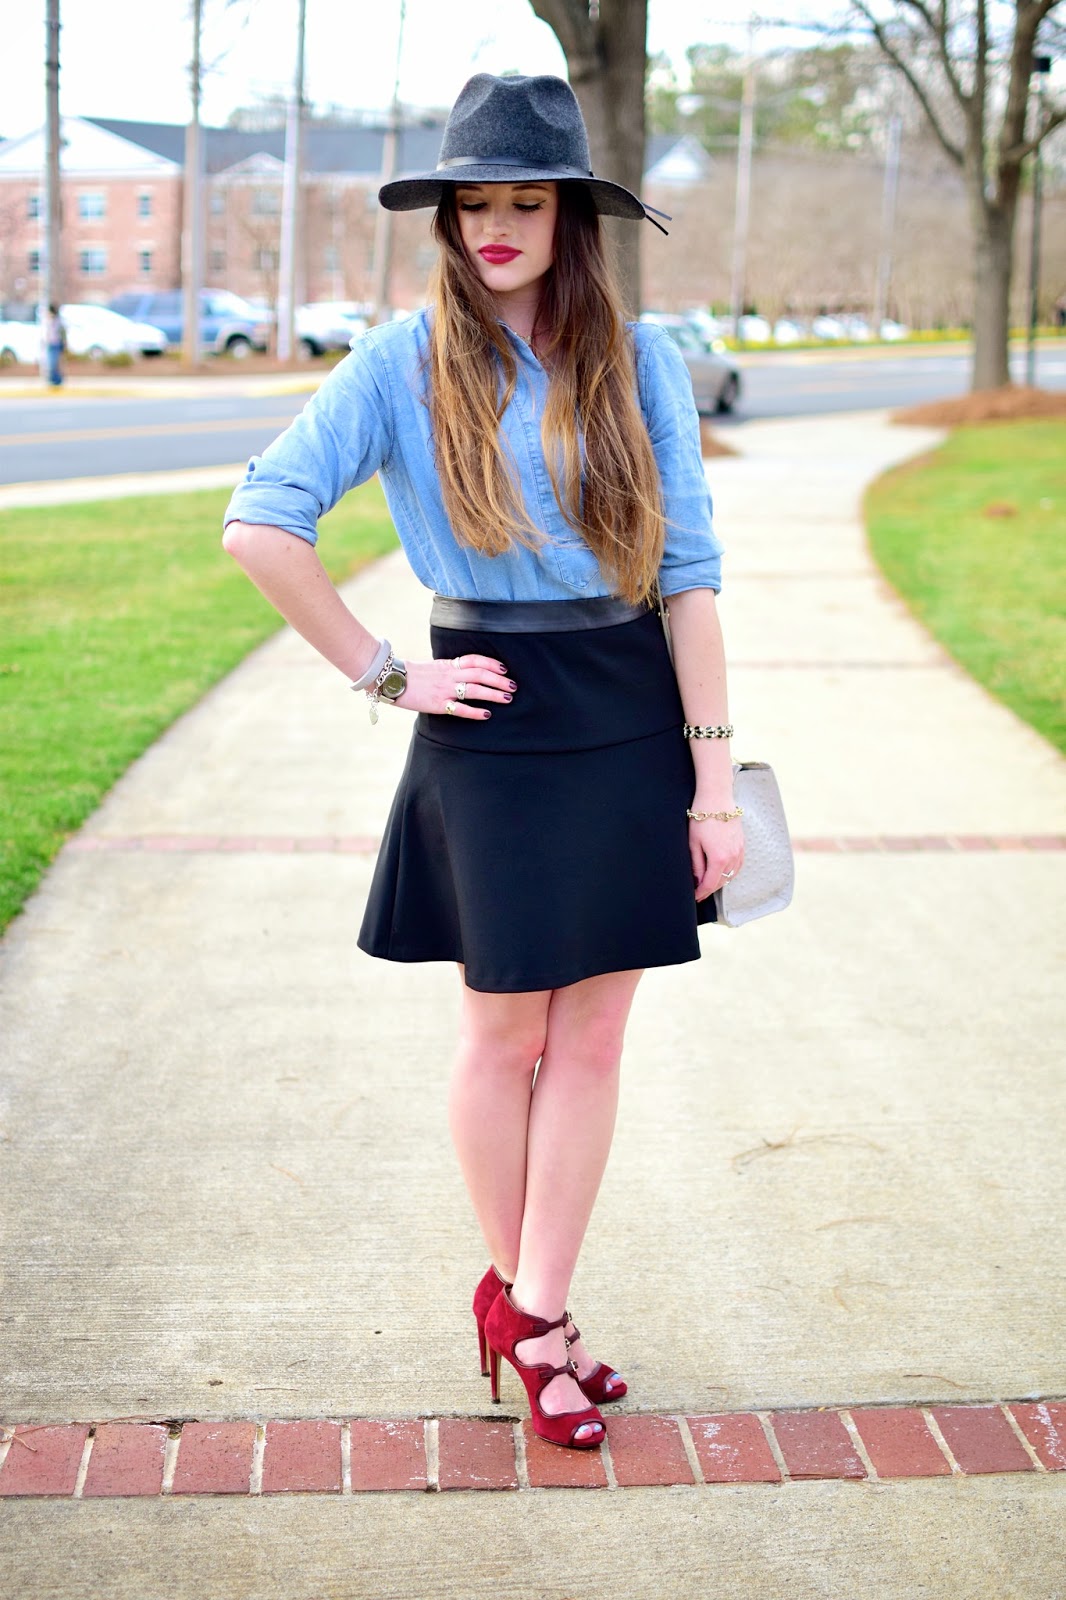 Kathleen's Fashion Fix: Up Your Game :: chambray + heels + hat